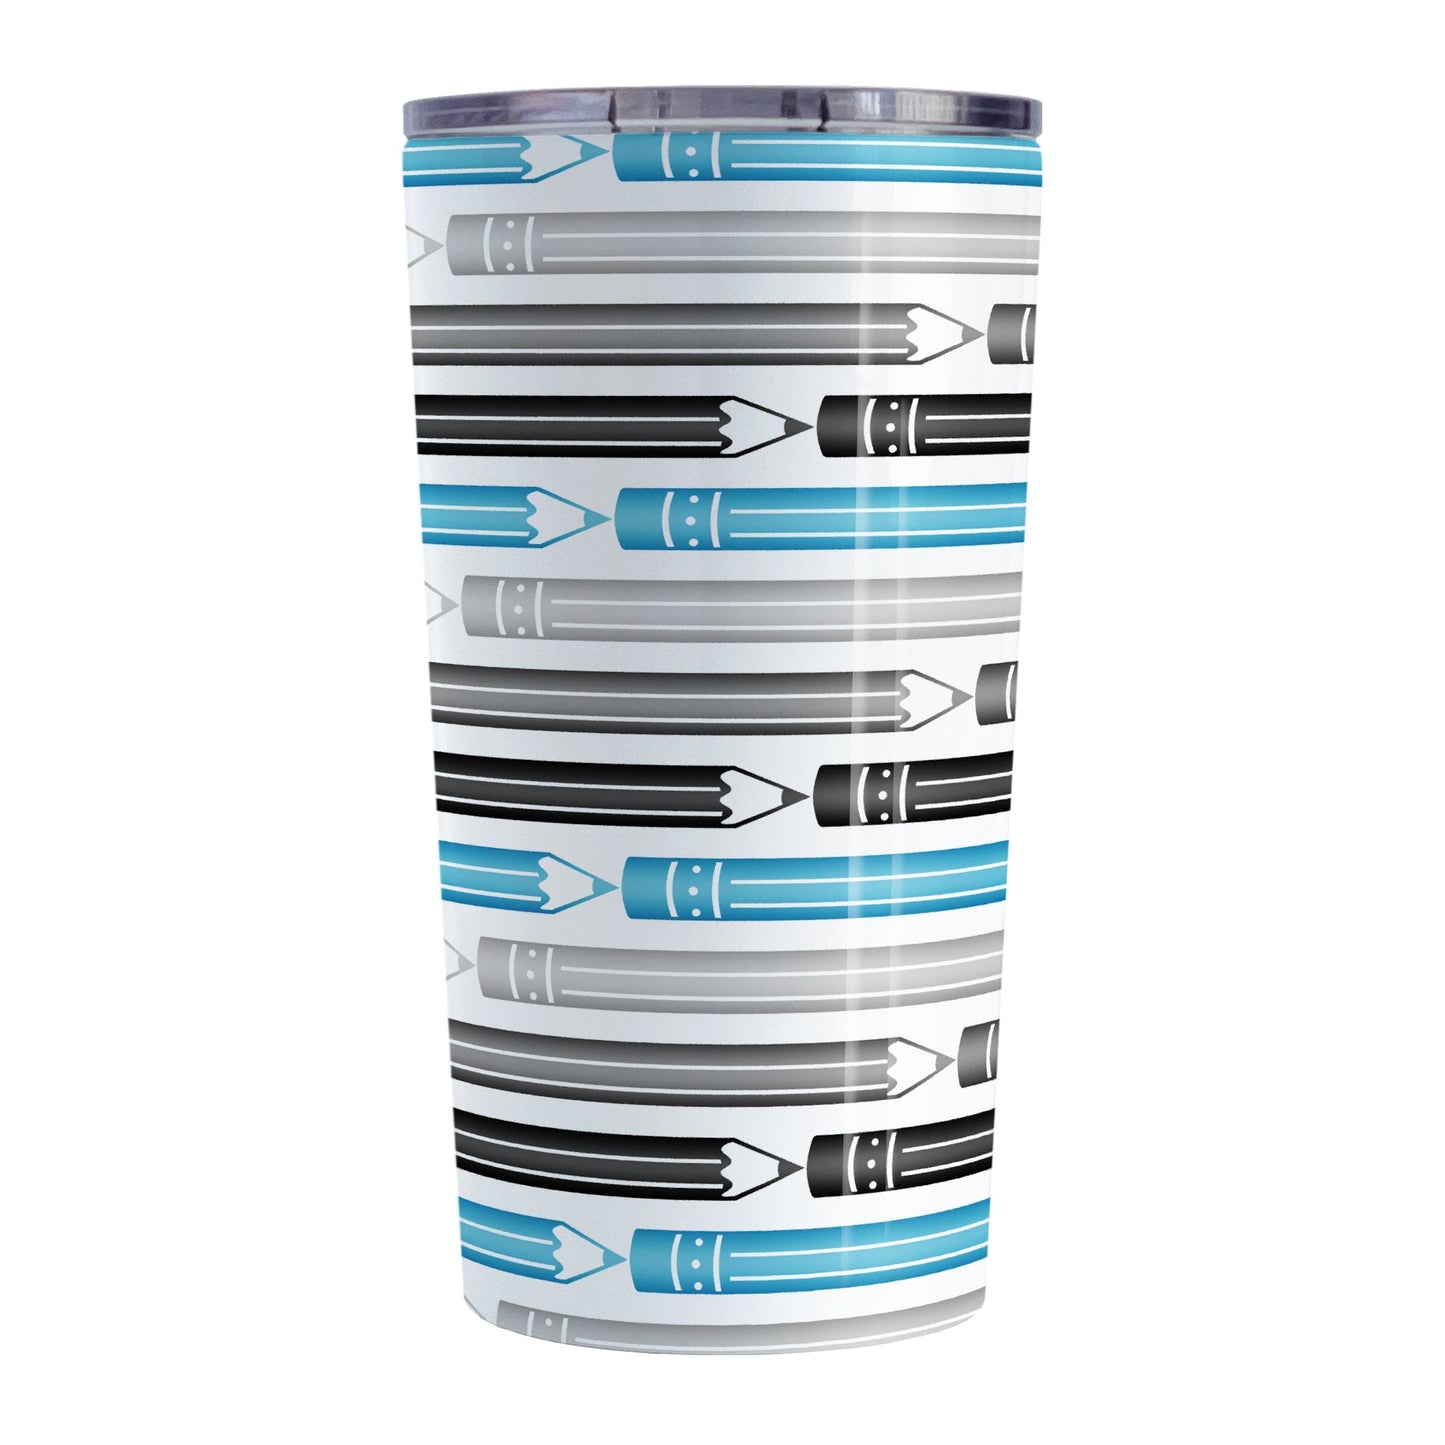 Blue Gray Black Pencils Pattern Tumbler Cup (20oz) at Amy's Coffee Mugs. A stainless steel tumbler cup designed with a horizontal pencils in blue, gray, and black, stacked in a pattern that wraps around the cup.